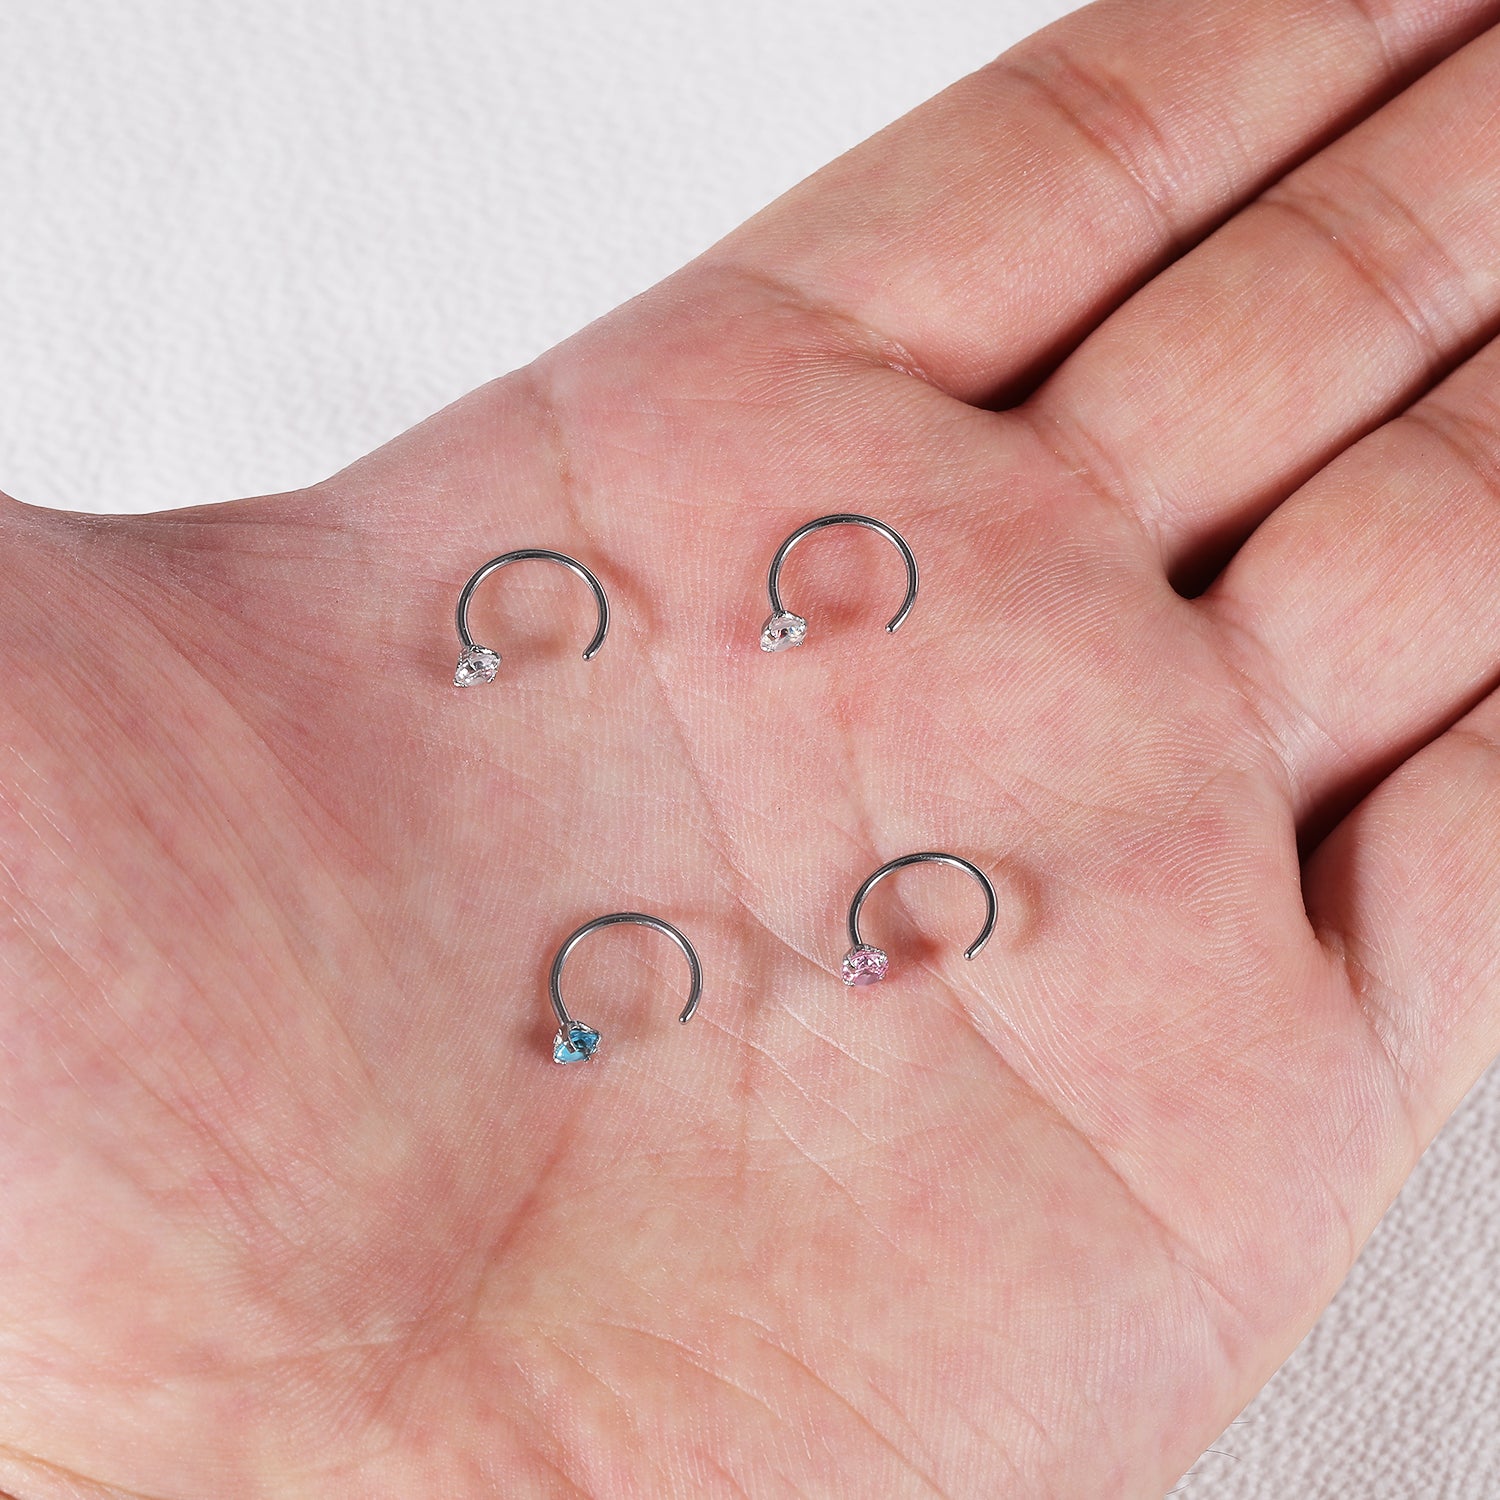 20g-round-crystal-nose-stud-piercing-c-shaped-nose-rings